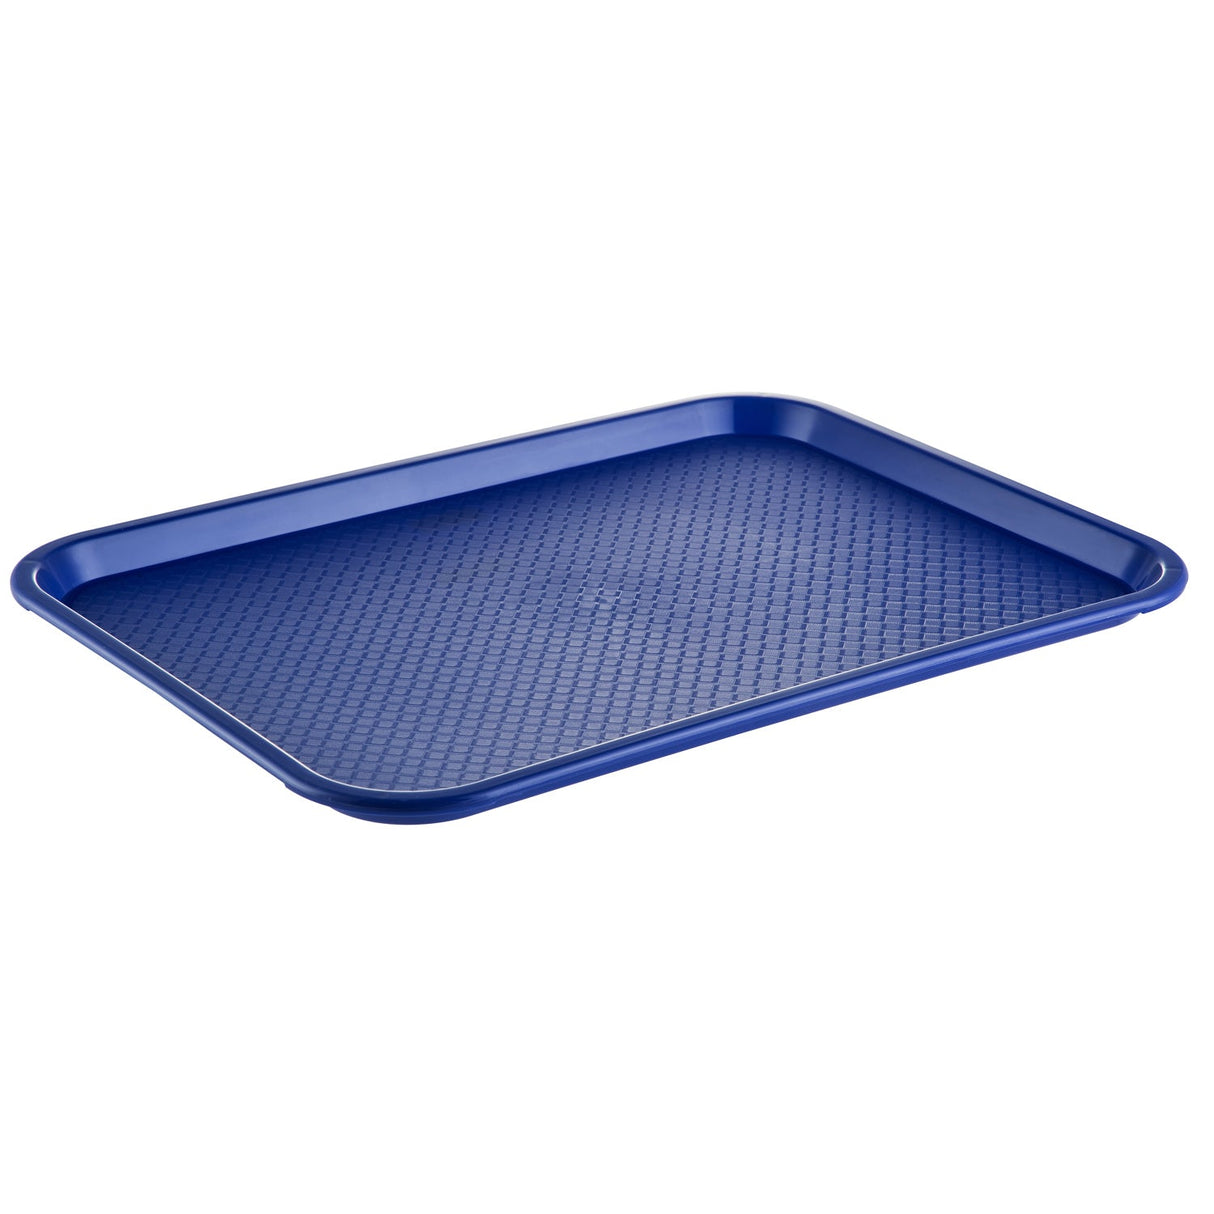 Tray PP Fast Food/Cafeteria Blue 16x12"